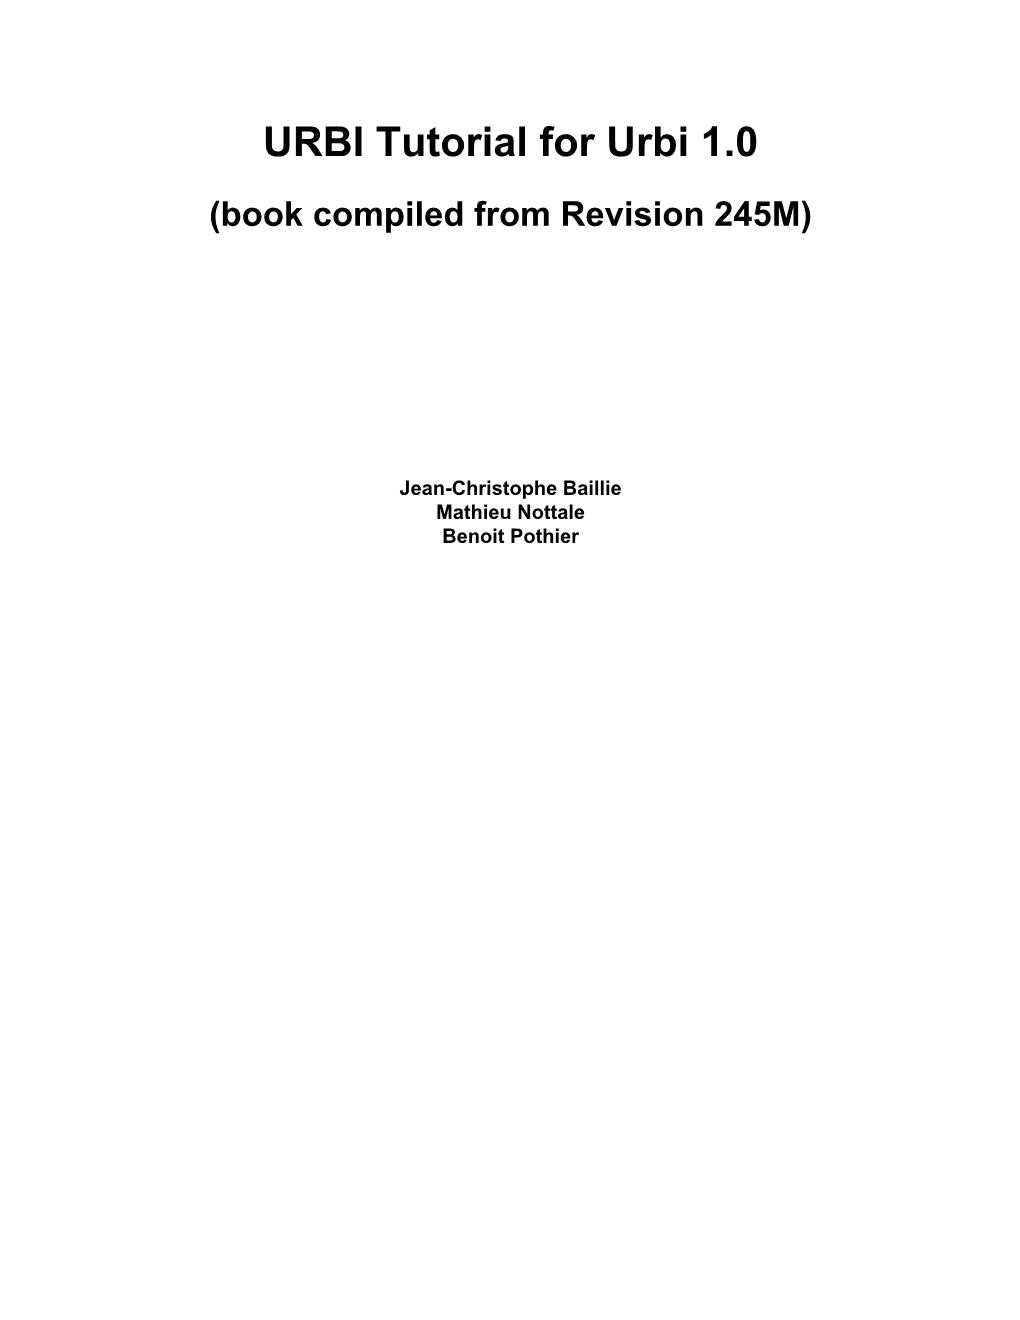 URBI Tutorial for Urbi 1.0 (Book Compiled from Revision 245M)